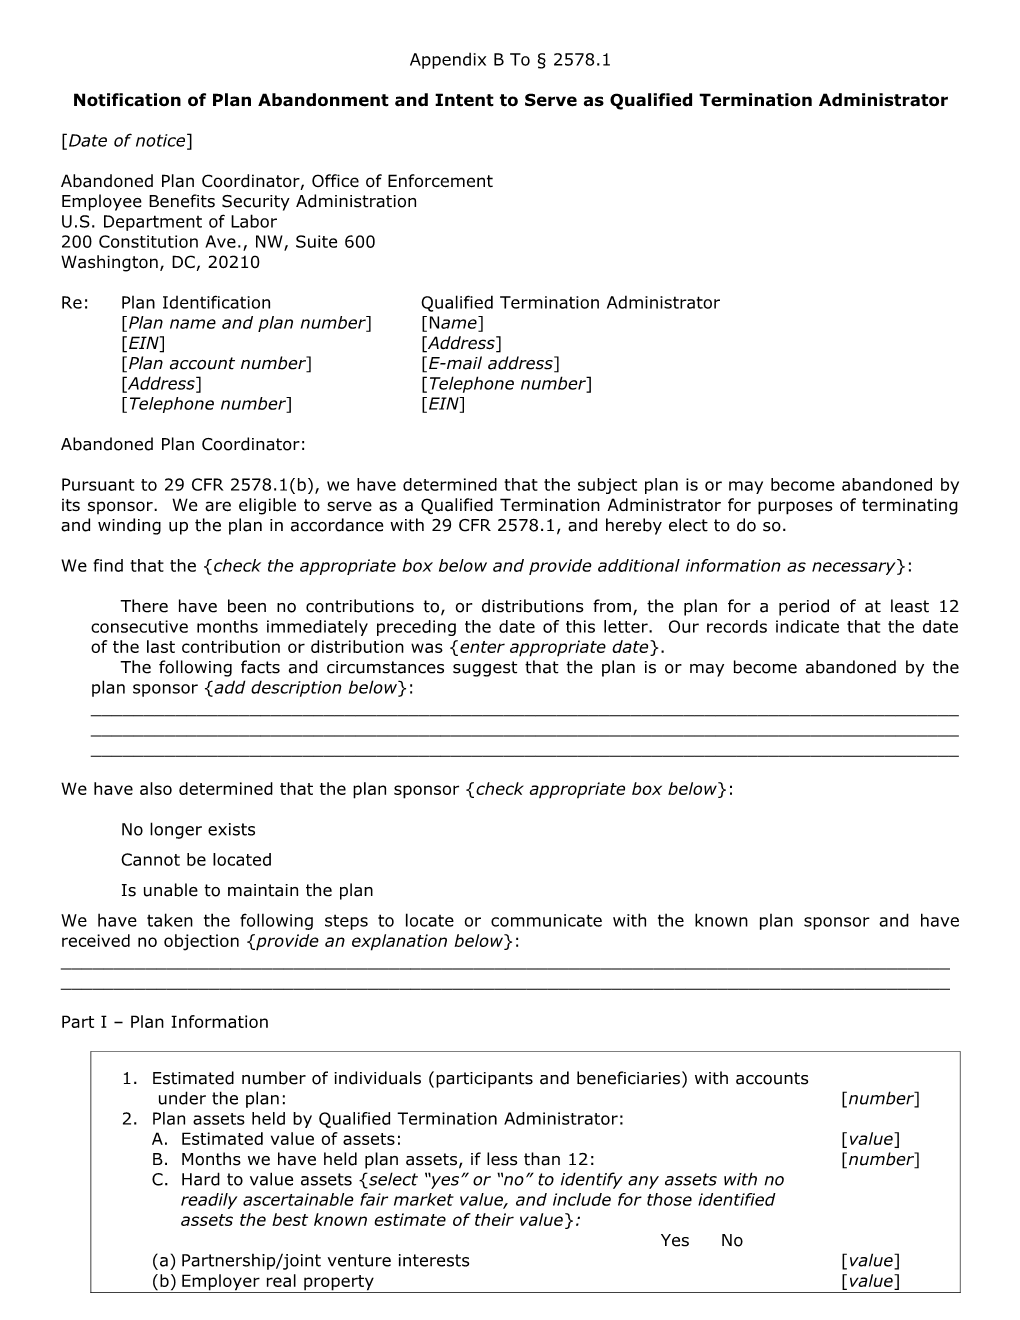 Notification of Plan Abandonment and Intent to Serve As Qualified Termination Administrator